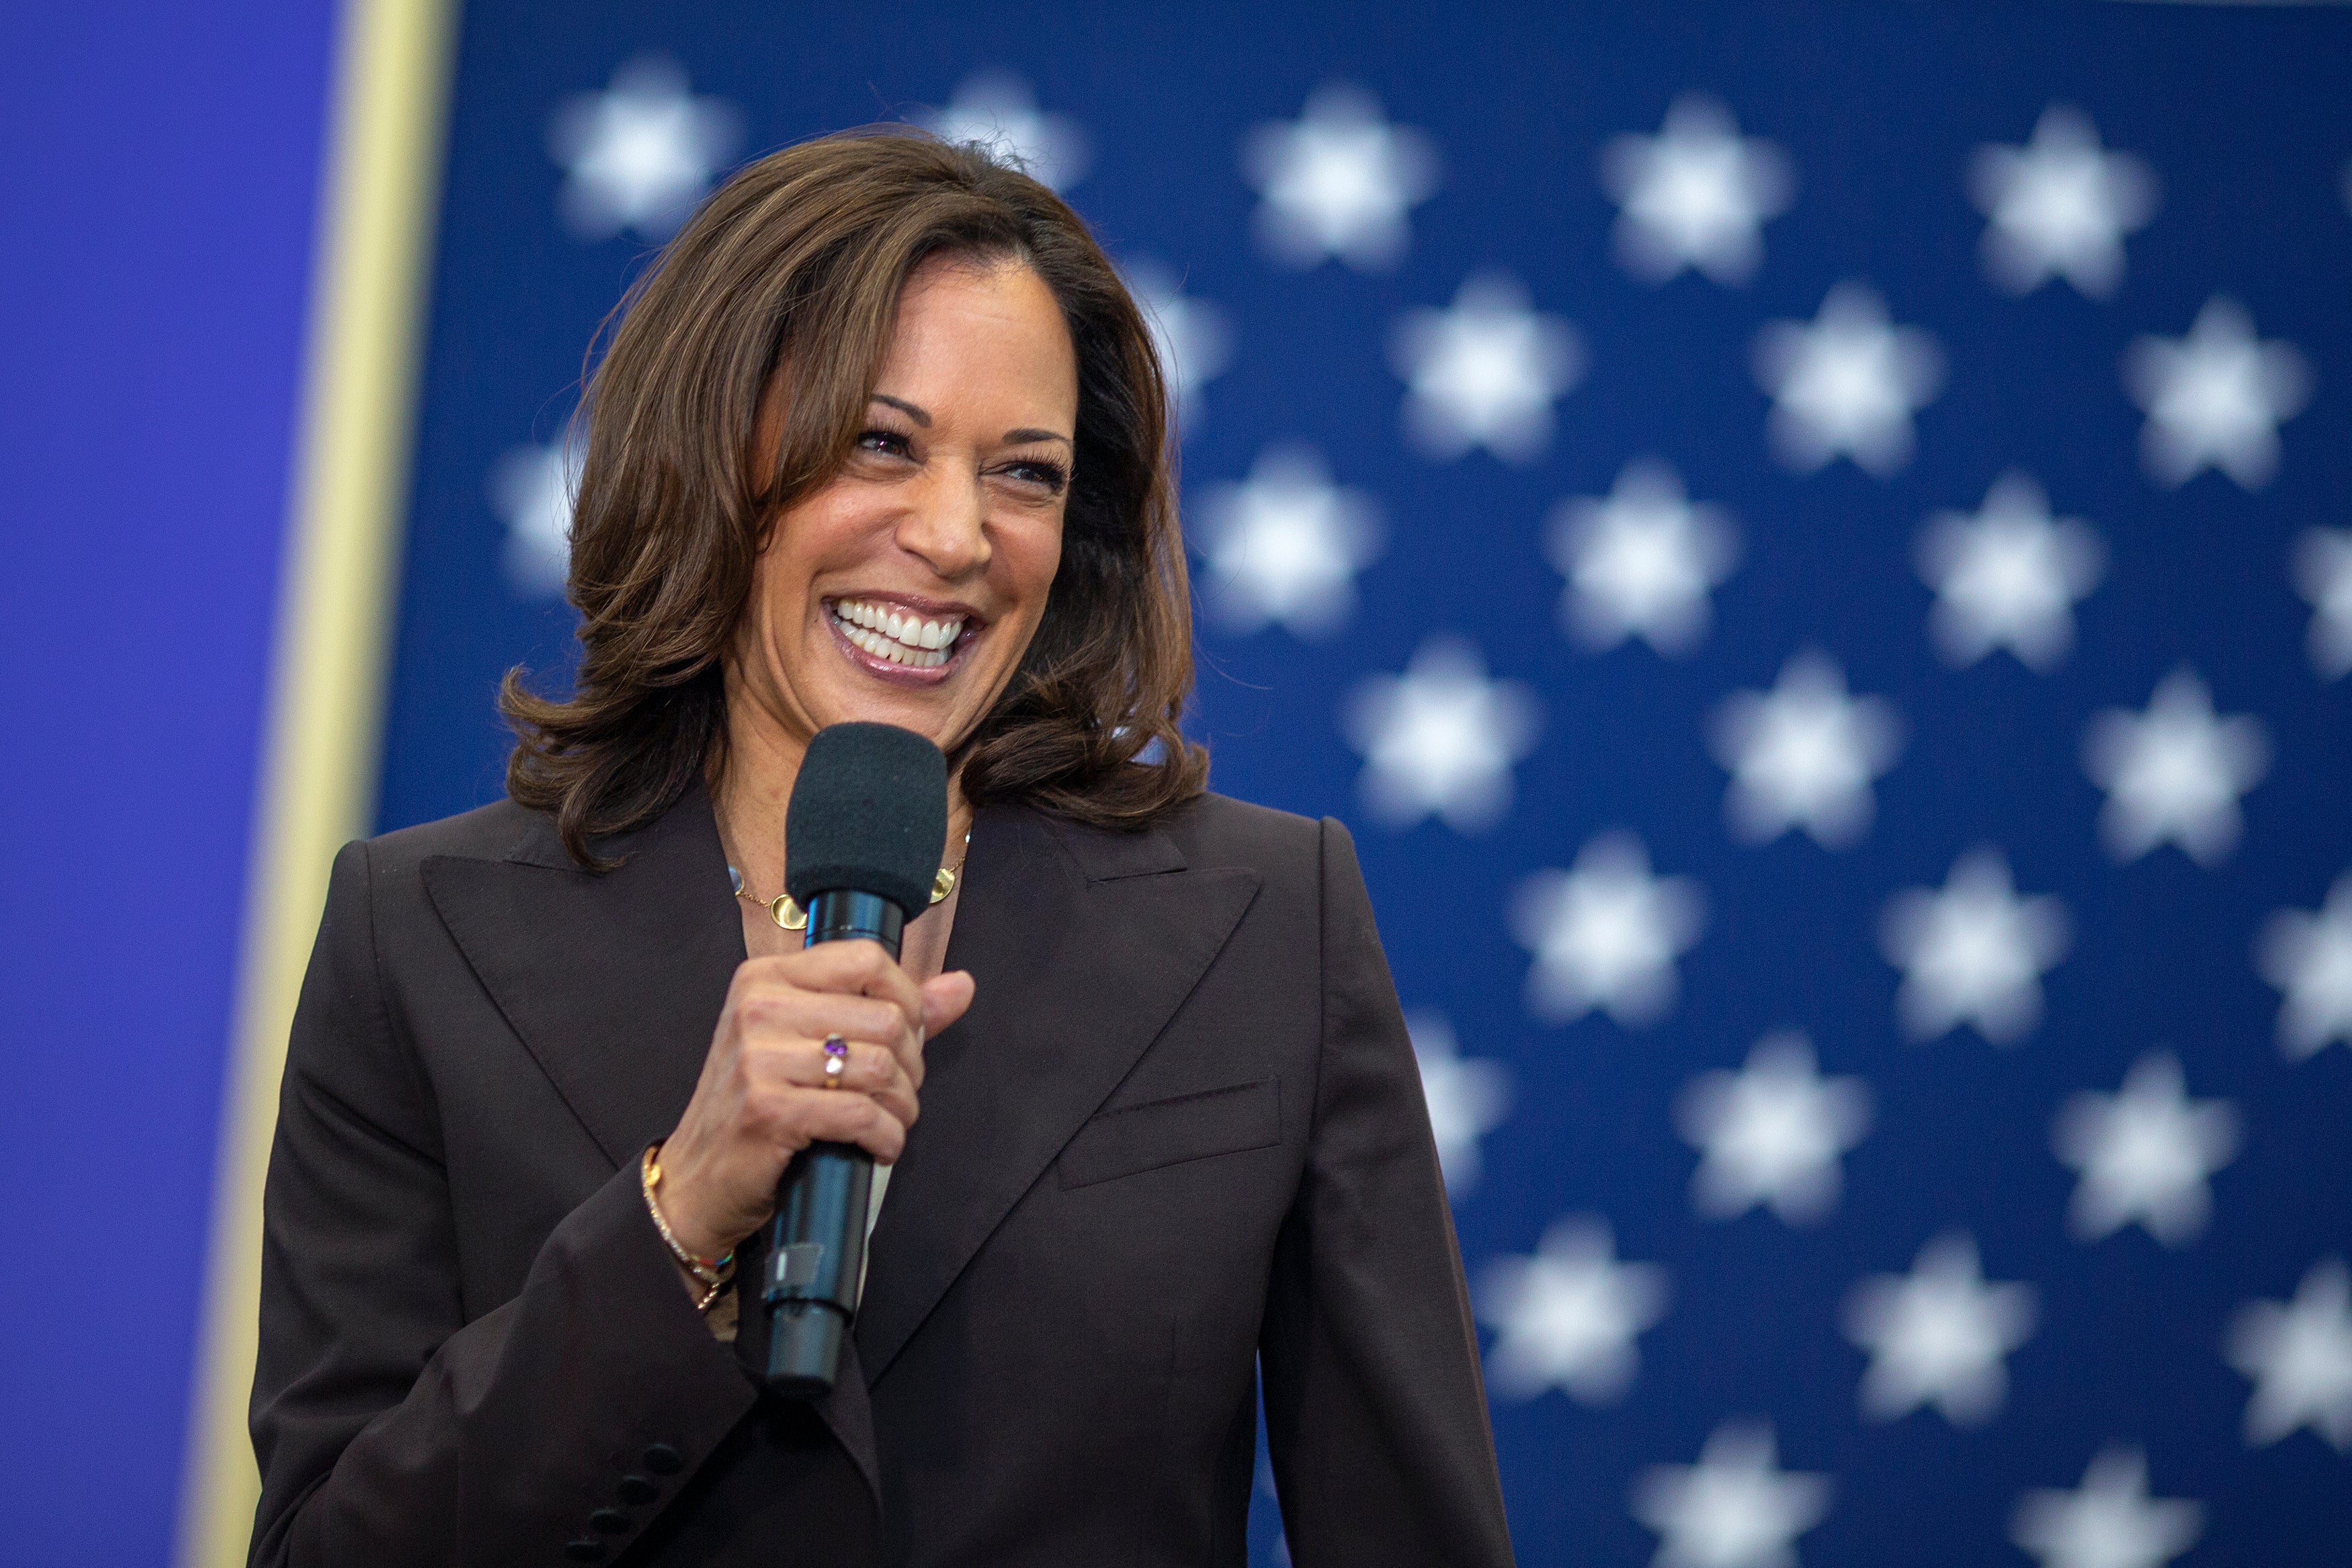 Kamala Harris Proposes To Disrupt ‘All-Out Assault’ On Women’s Reproductive Rights